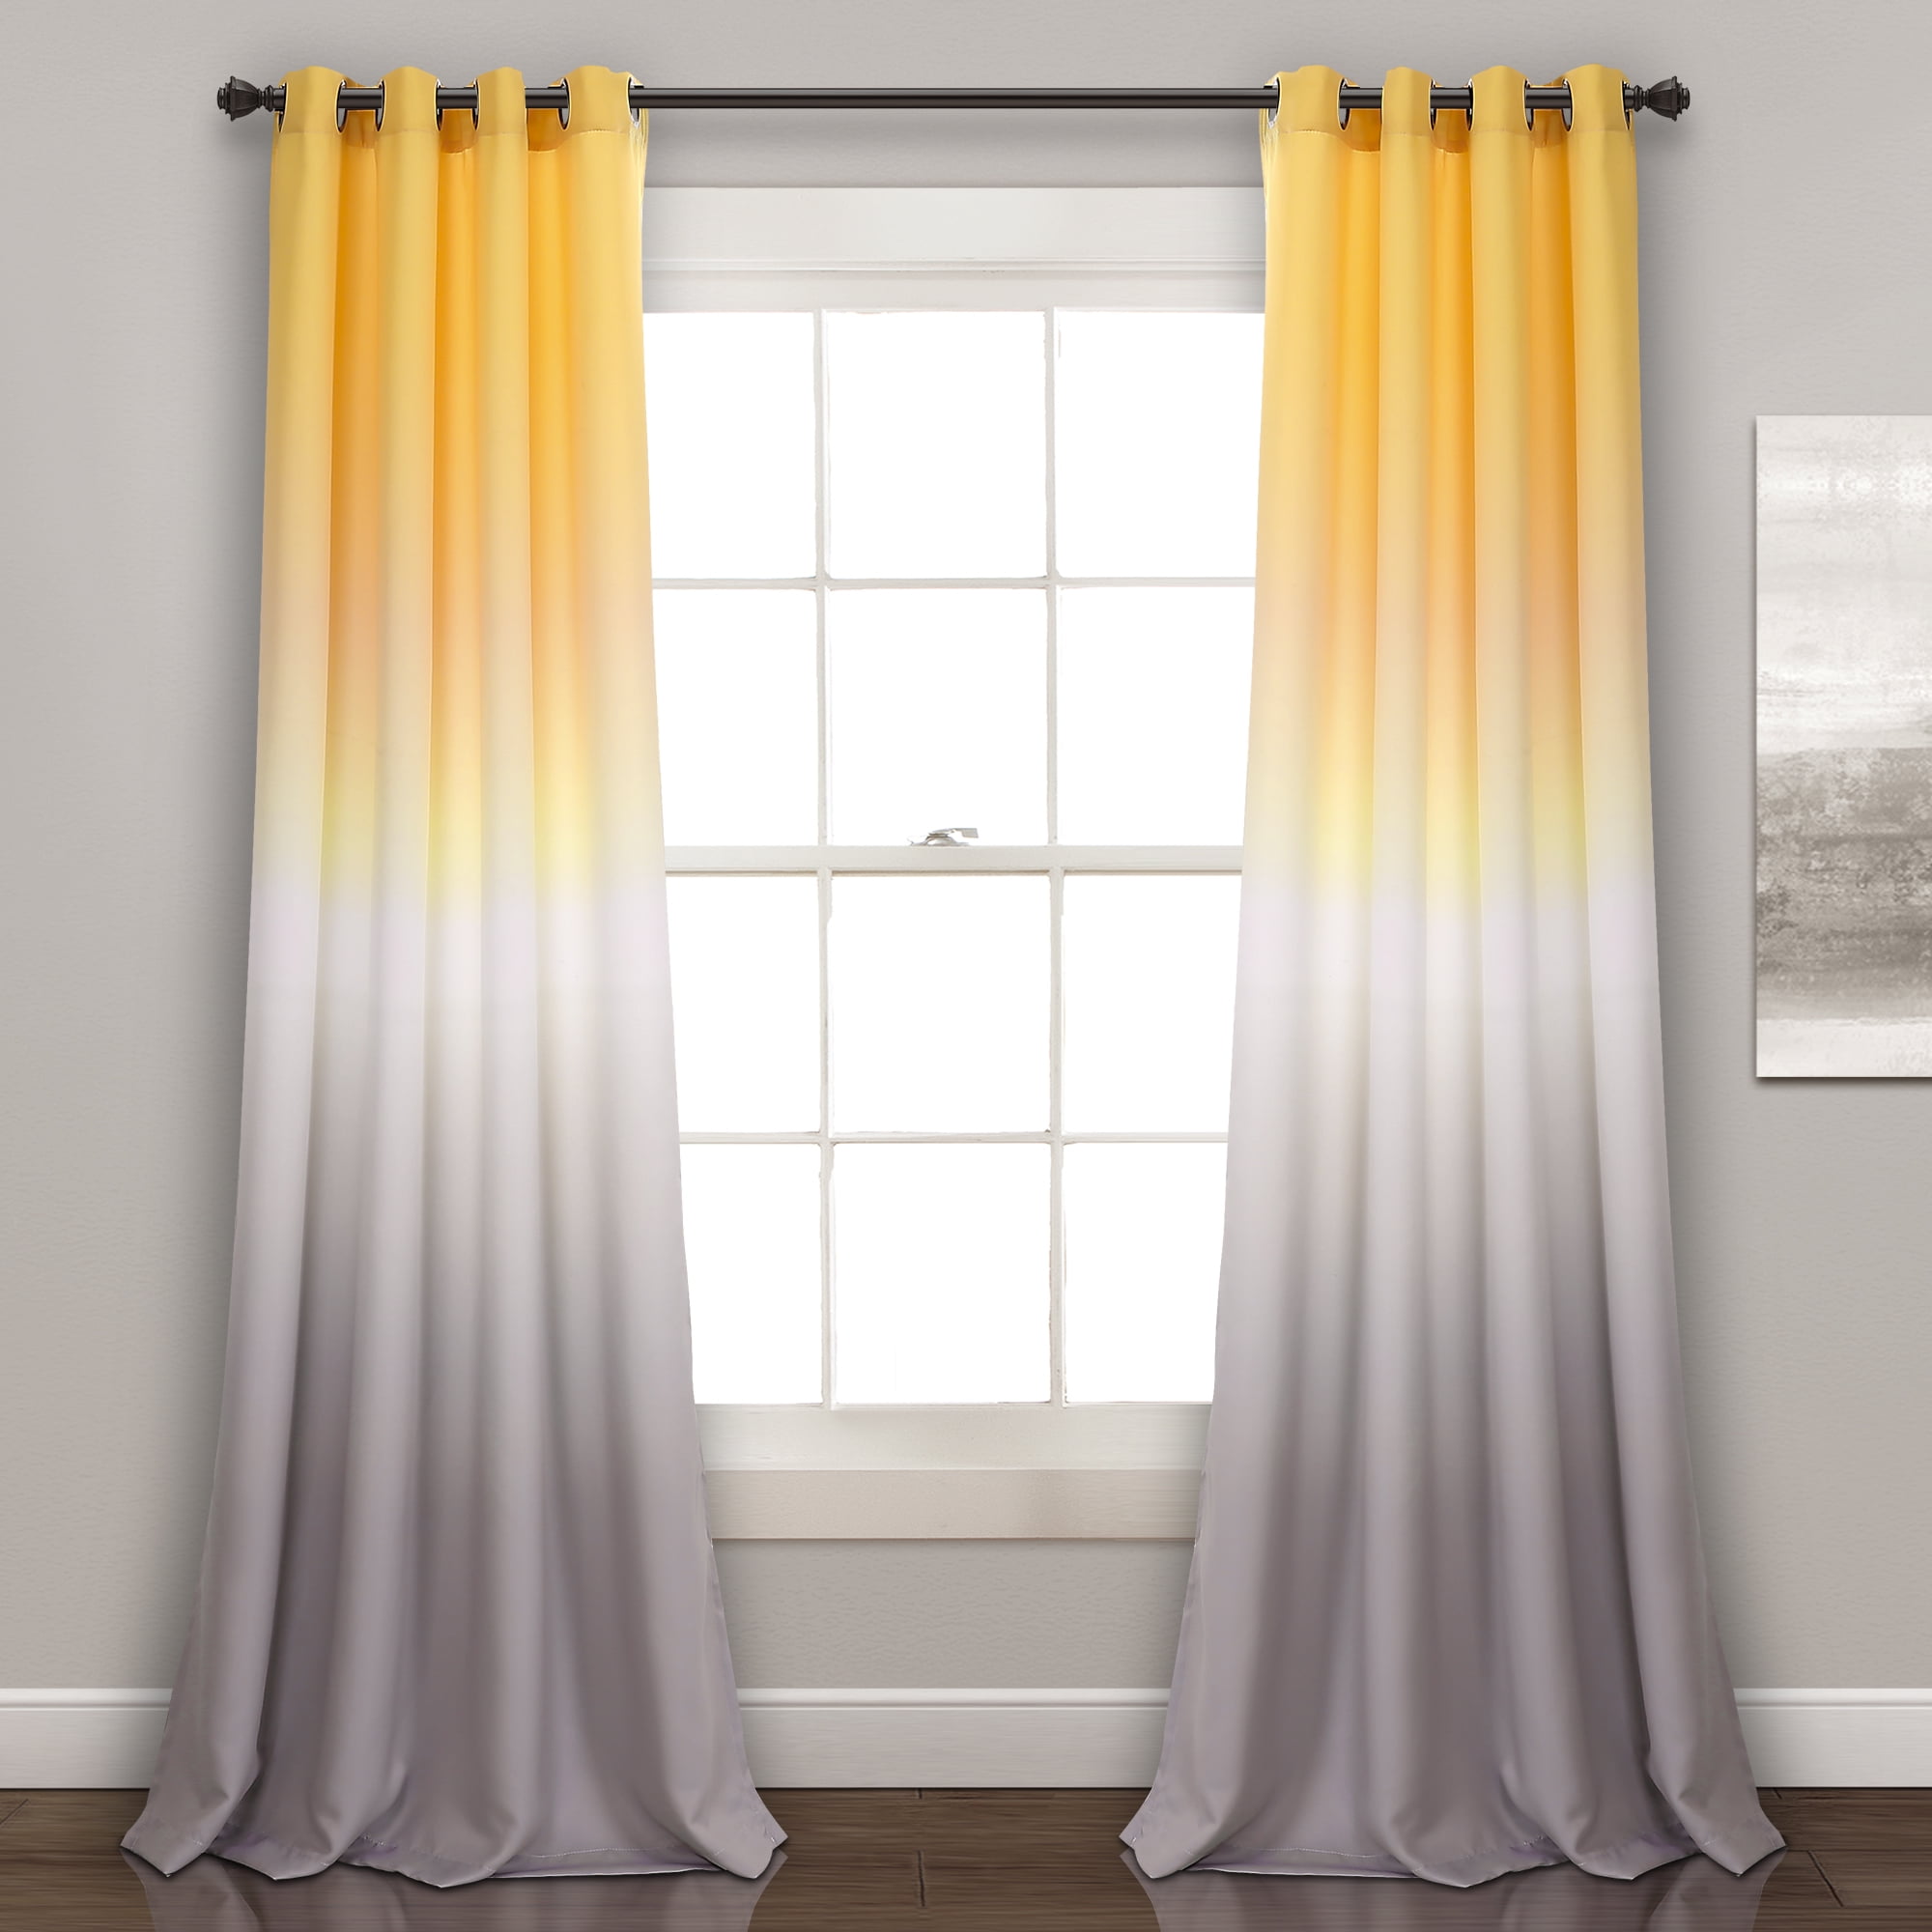 Intelligent Design Yellow Curtains for Living Room Modern Contemporary Grommet Room Darkening Curtains for Bedroom 42X63 Alex Geometric Chevron Window Curtains 2-Panel Pack